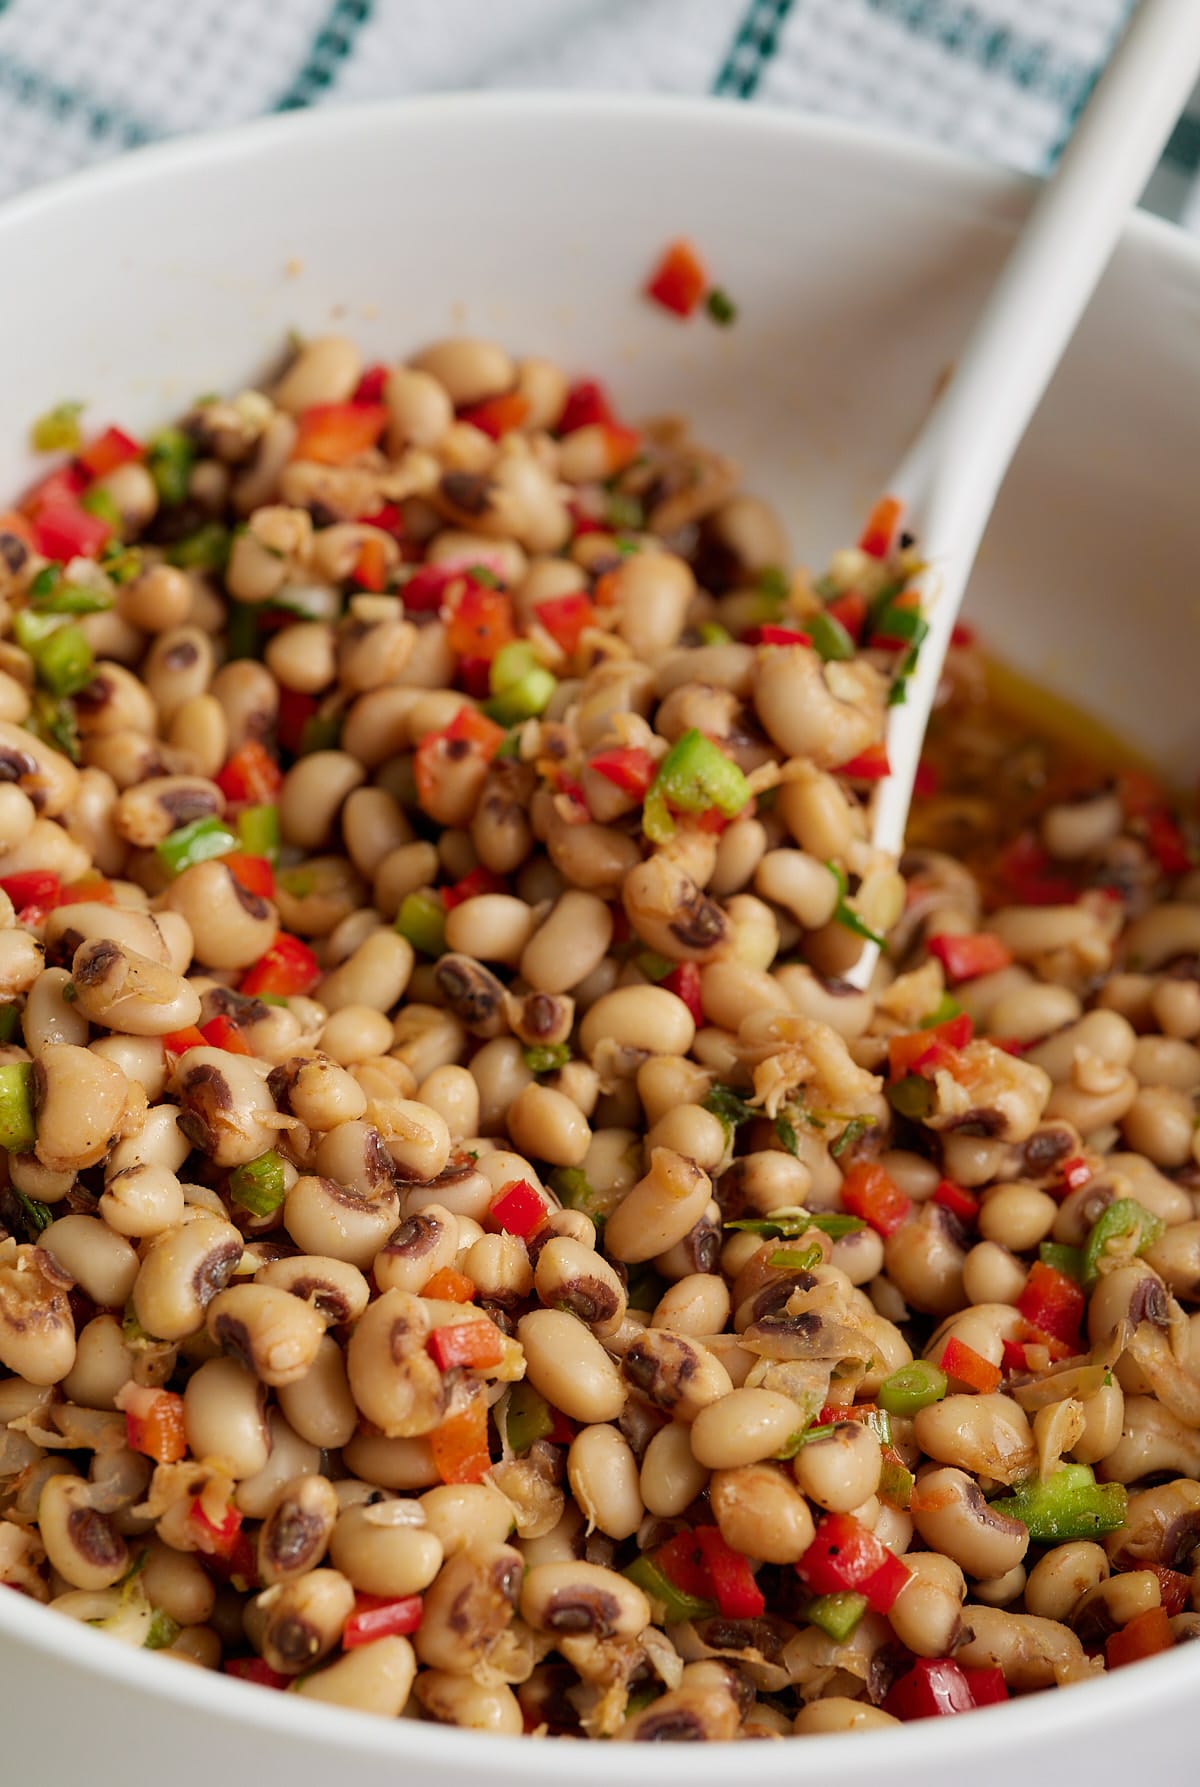 A spoon mixing together the black eyed pea salad.